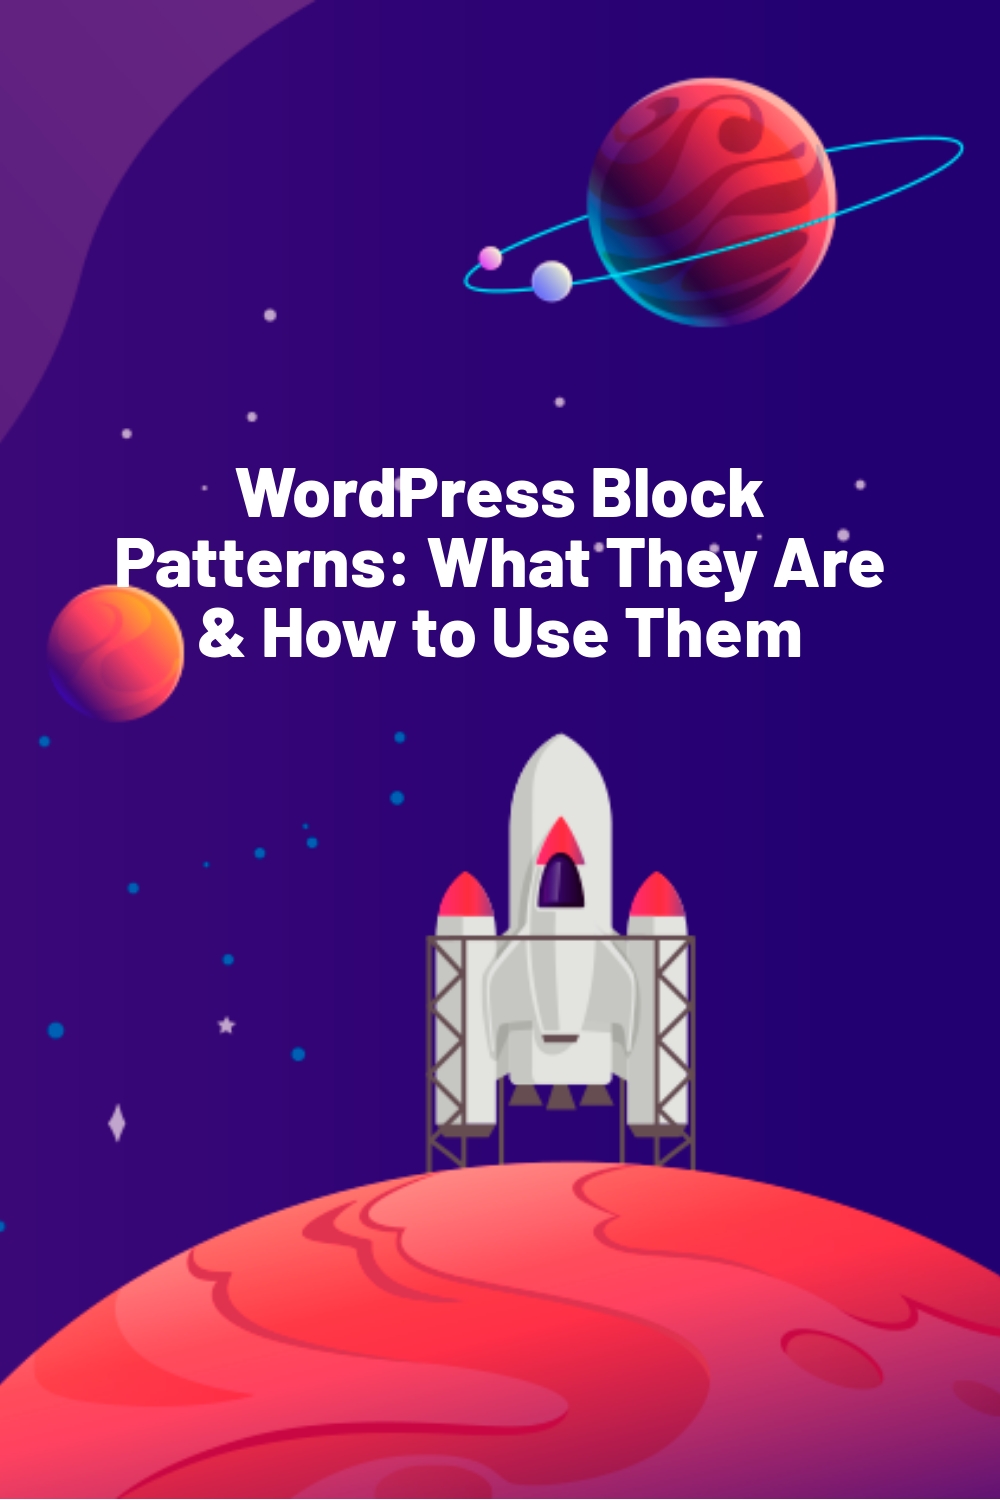 WordPress Block Patterns: What They Are & How to Use Them